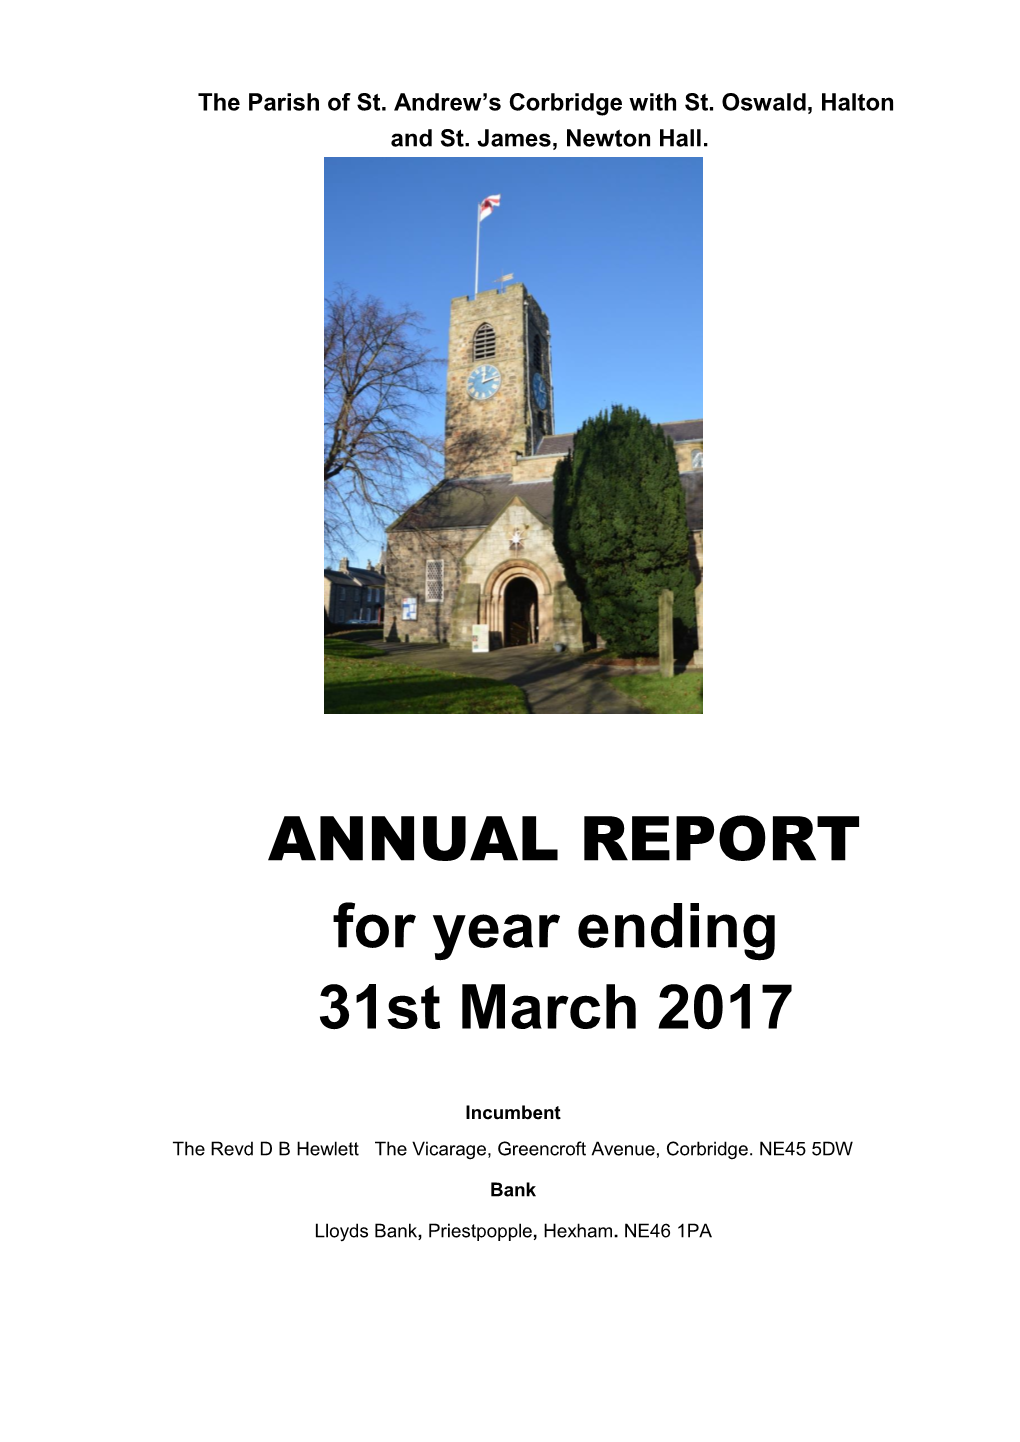 ANNUAL REPORT for Year Ending 31St March 2017